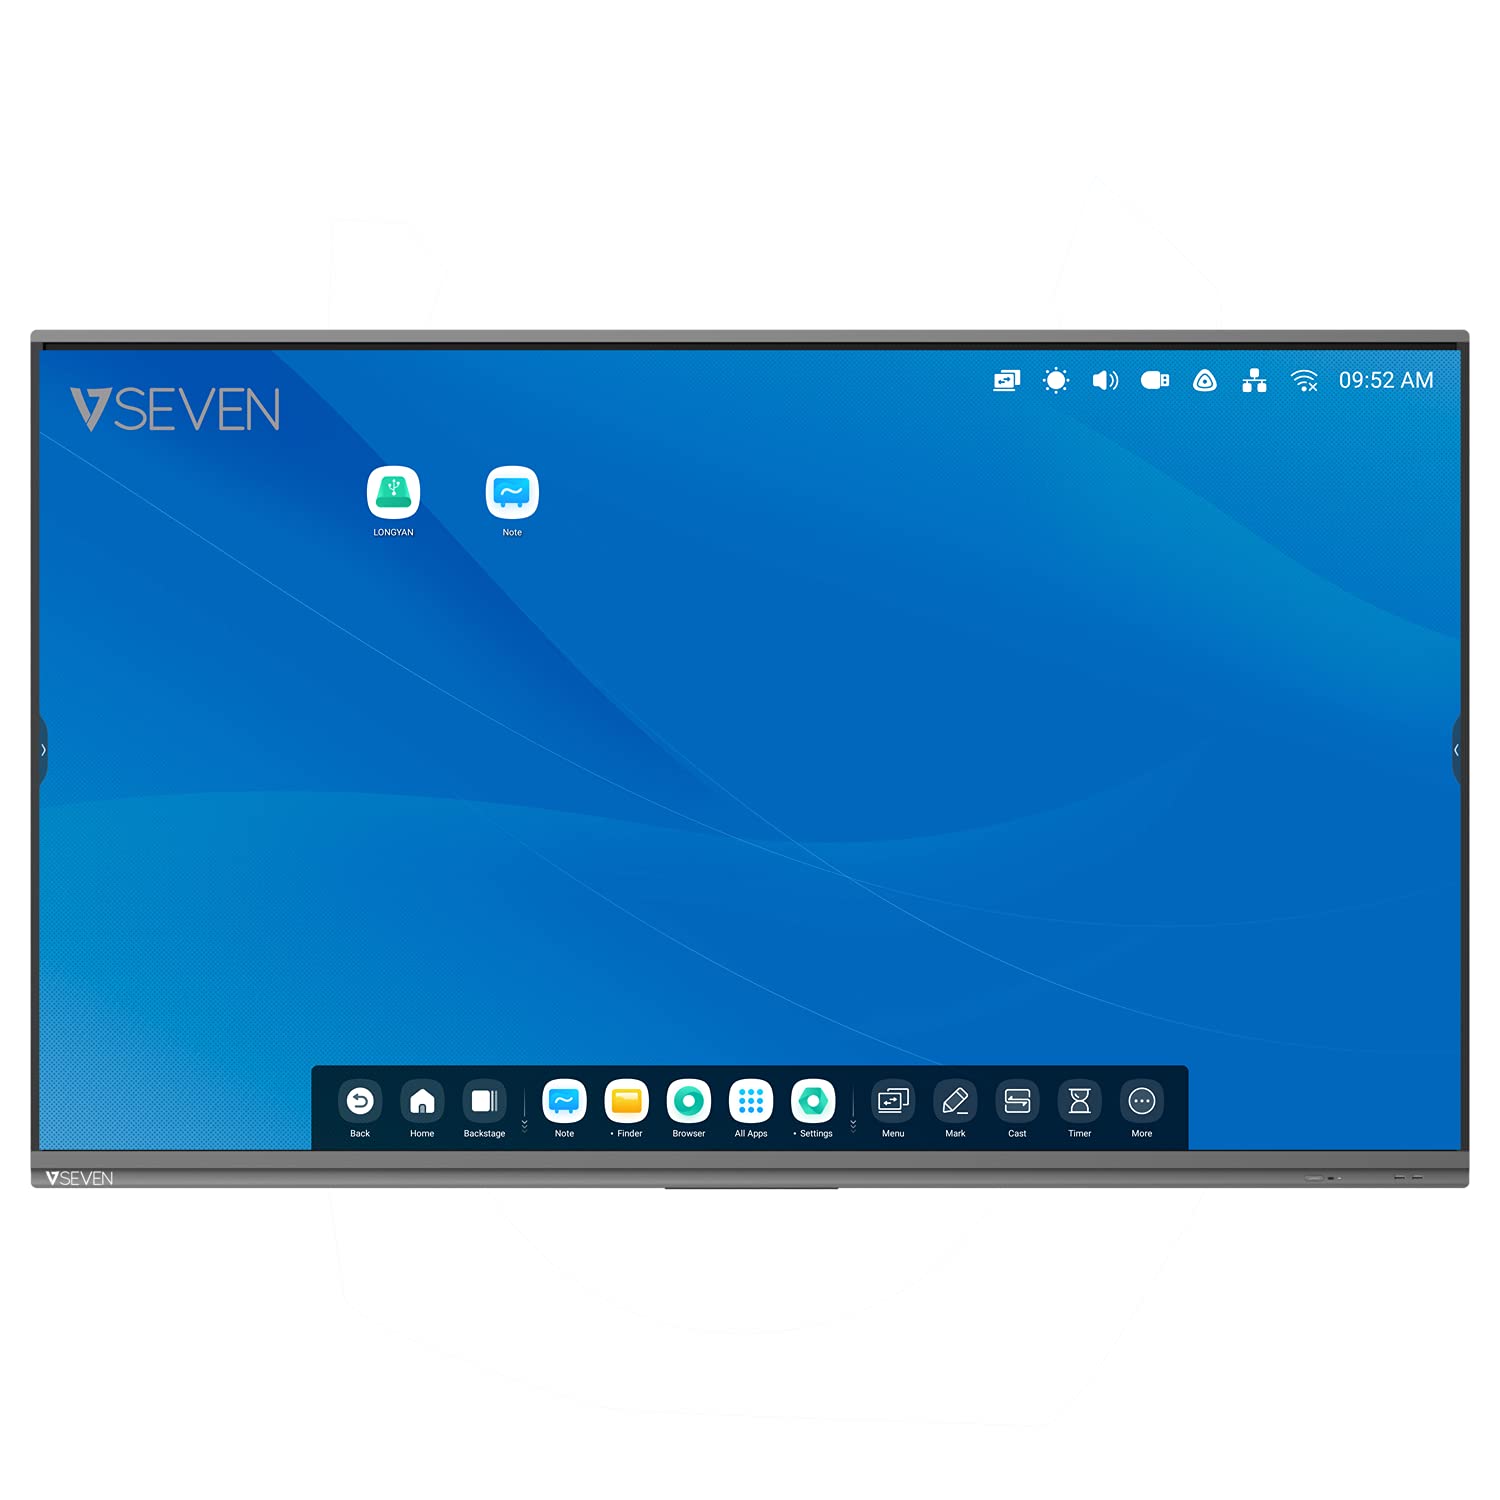 86 IN 4K IFP ANDROID 9 DISPLAY